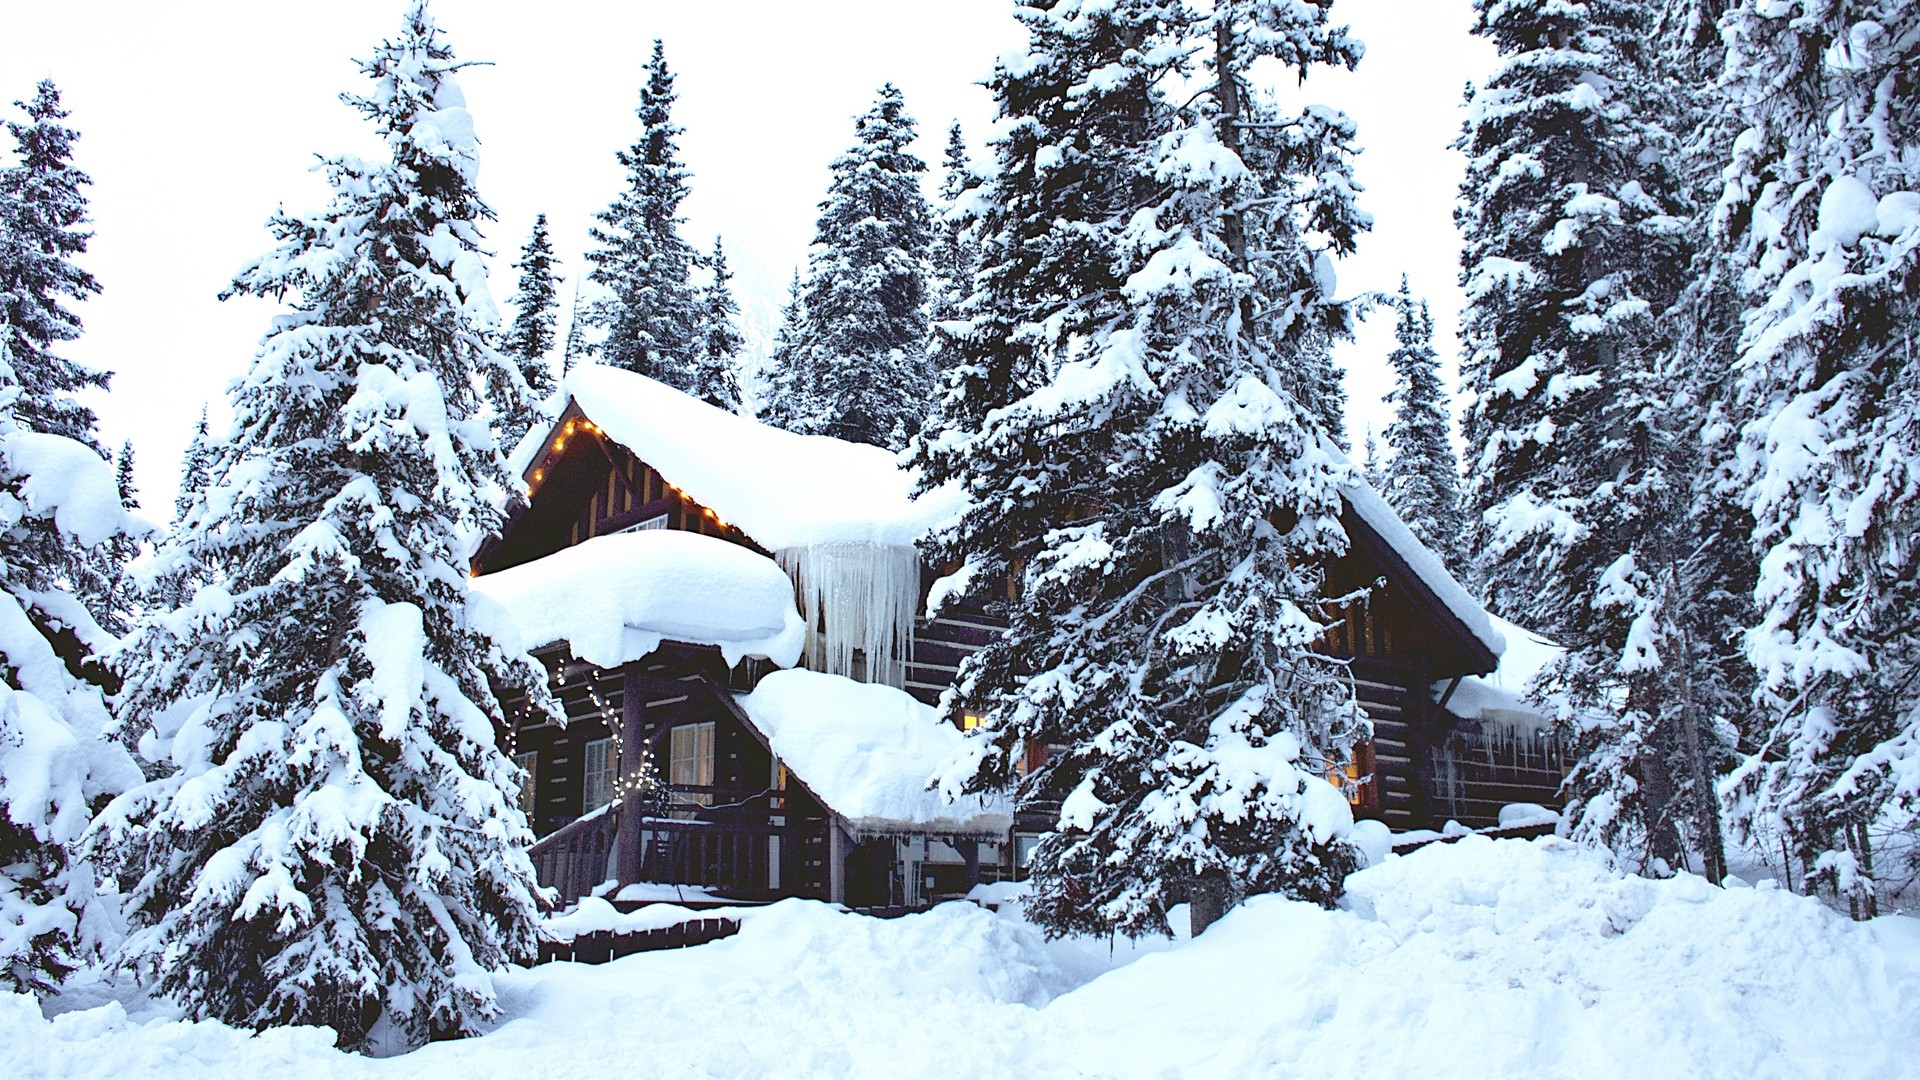 1920x1080 wallpapers: house, forest, winter, snow (image)